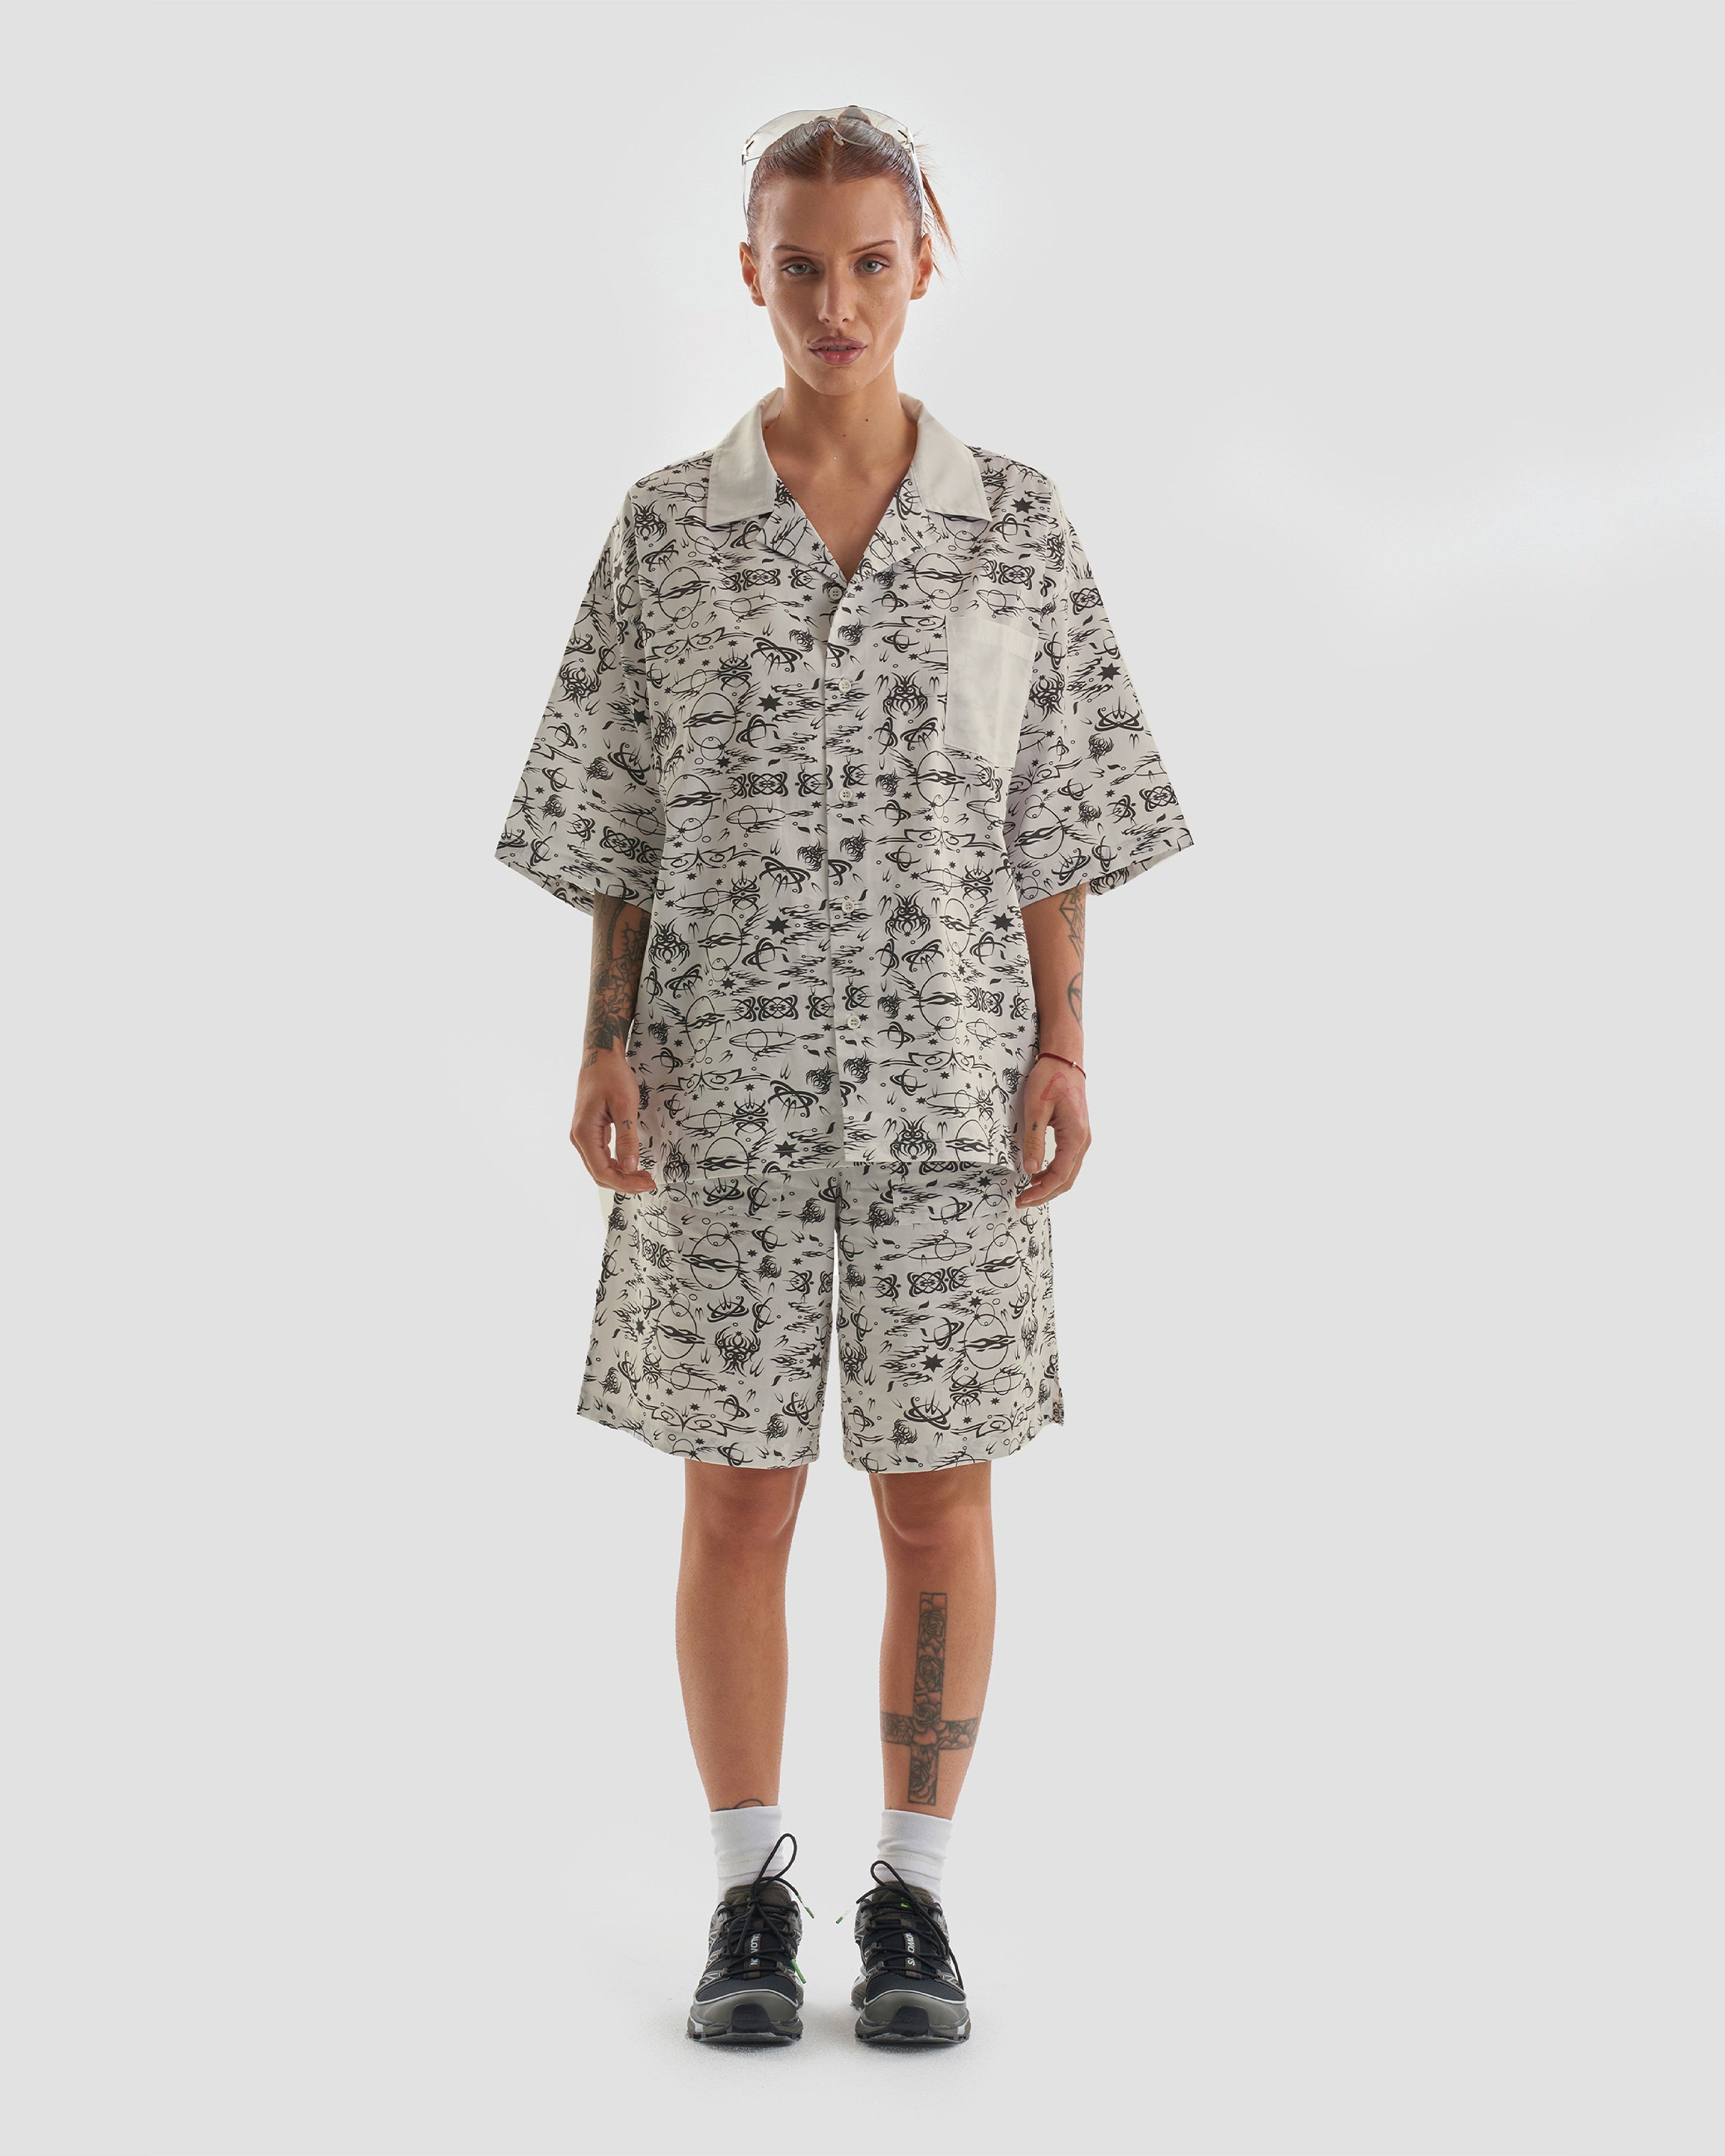 Image of No Regrets Oversized Short Sleeve Shirt with Tattoo Print in Ecru